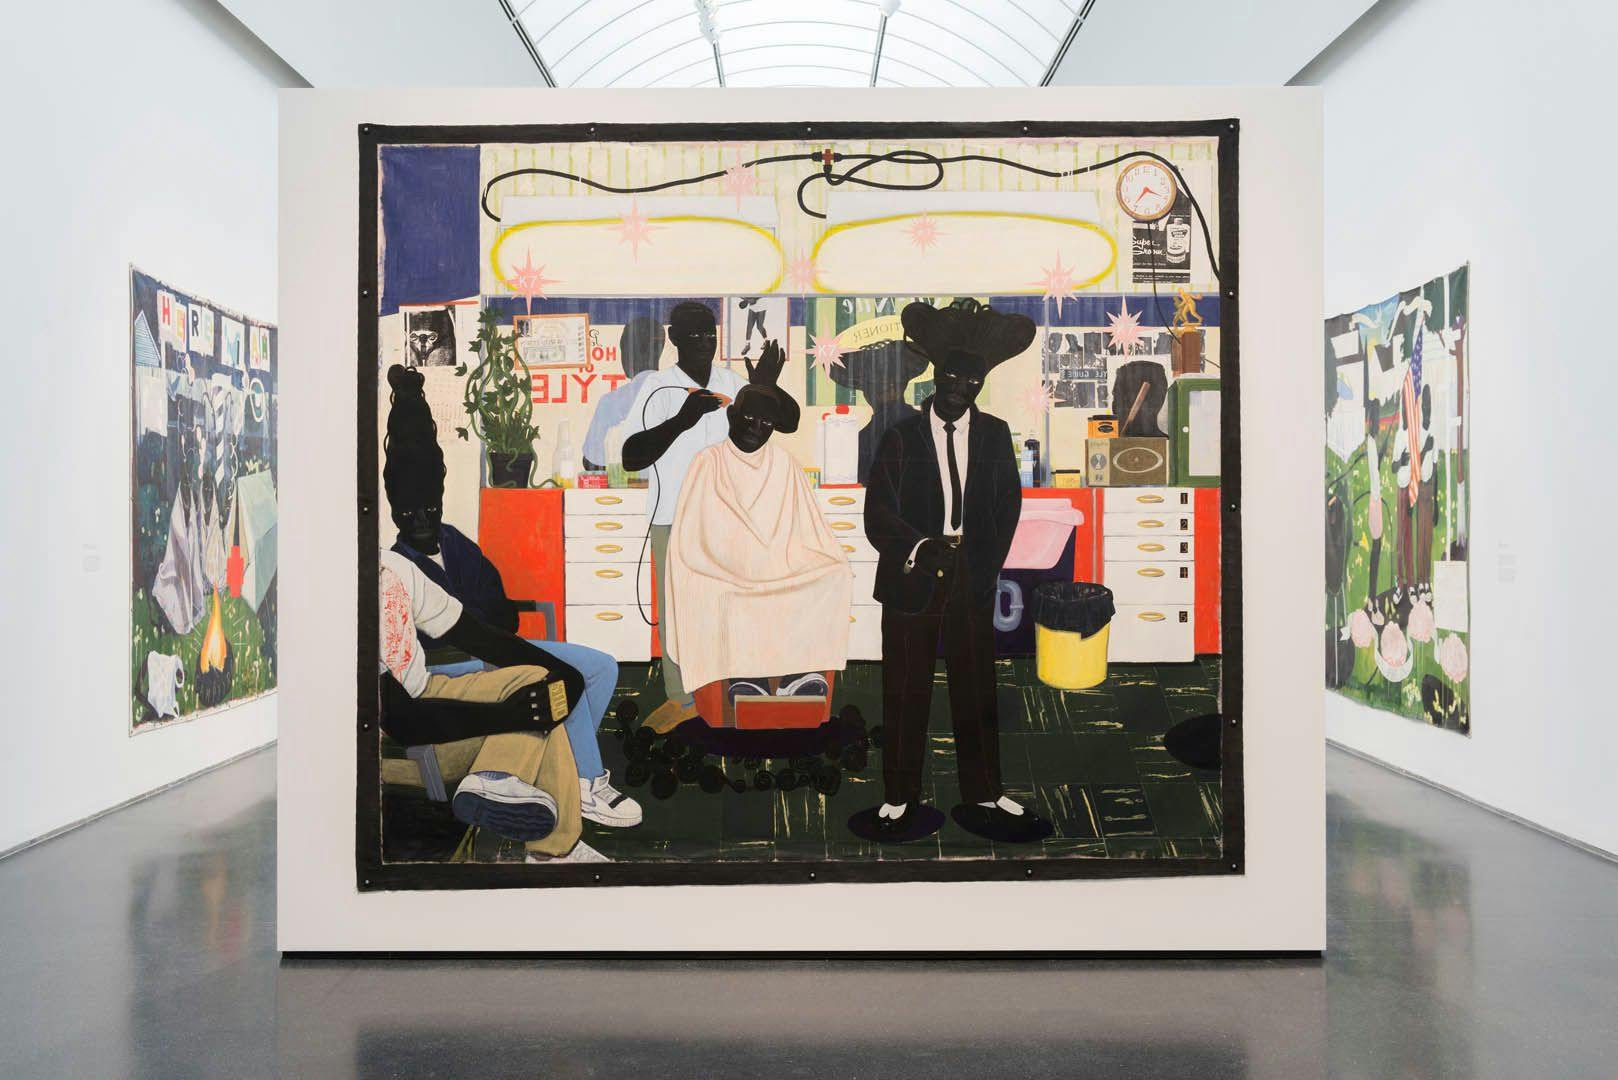 Installation view of the exhibition Kerry James Marshall: Mastry at MCA Chicago, dated 2016.